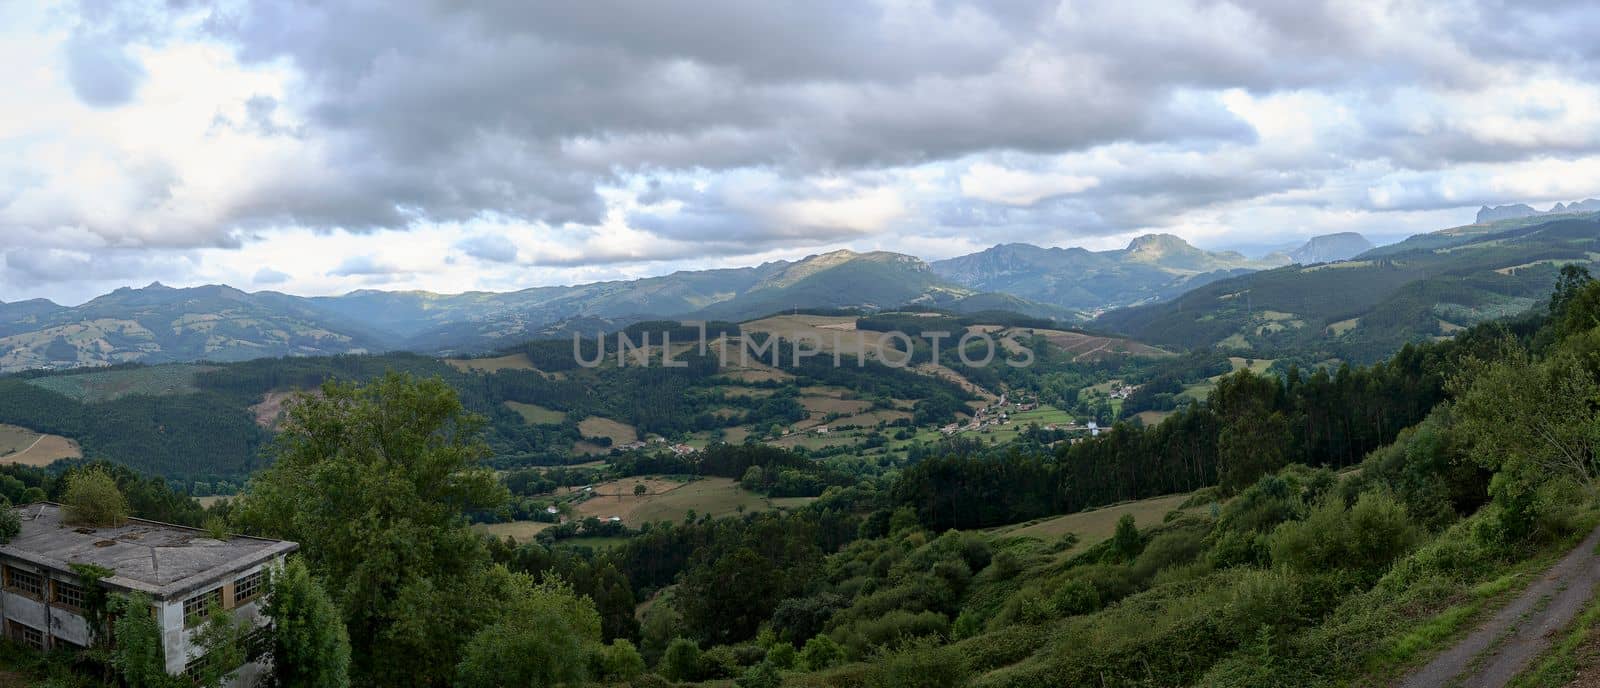 Rustic mountain landscape with cloudy sky.Bien Aparecida, Cantabria, meadows, trees and pastures for animals, rustic houses, sky with storm clouds.Panoramic photography